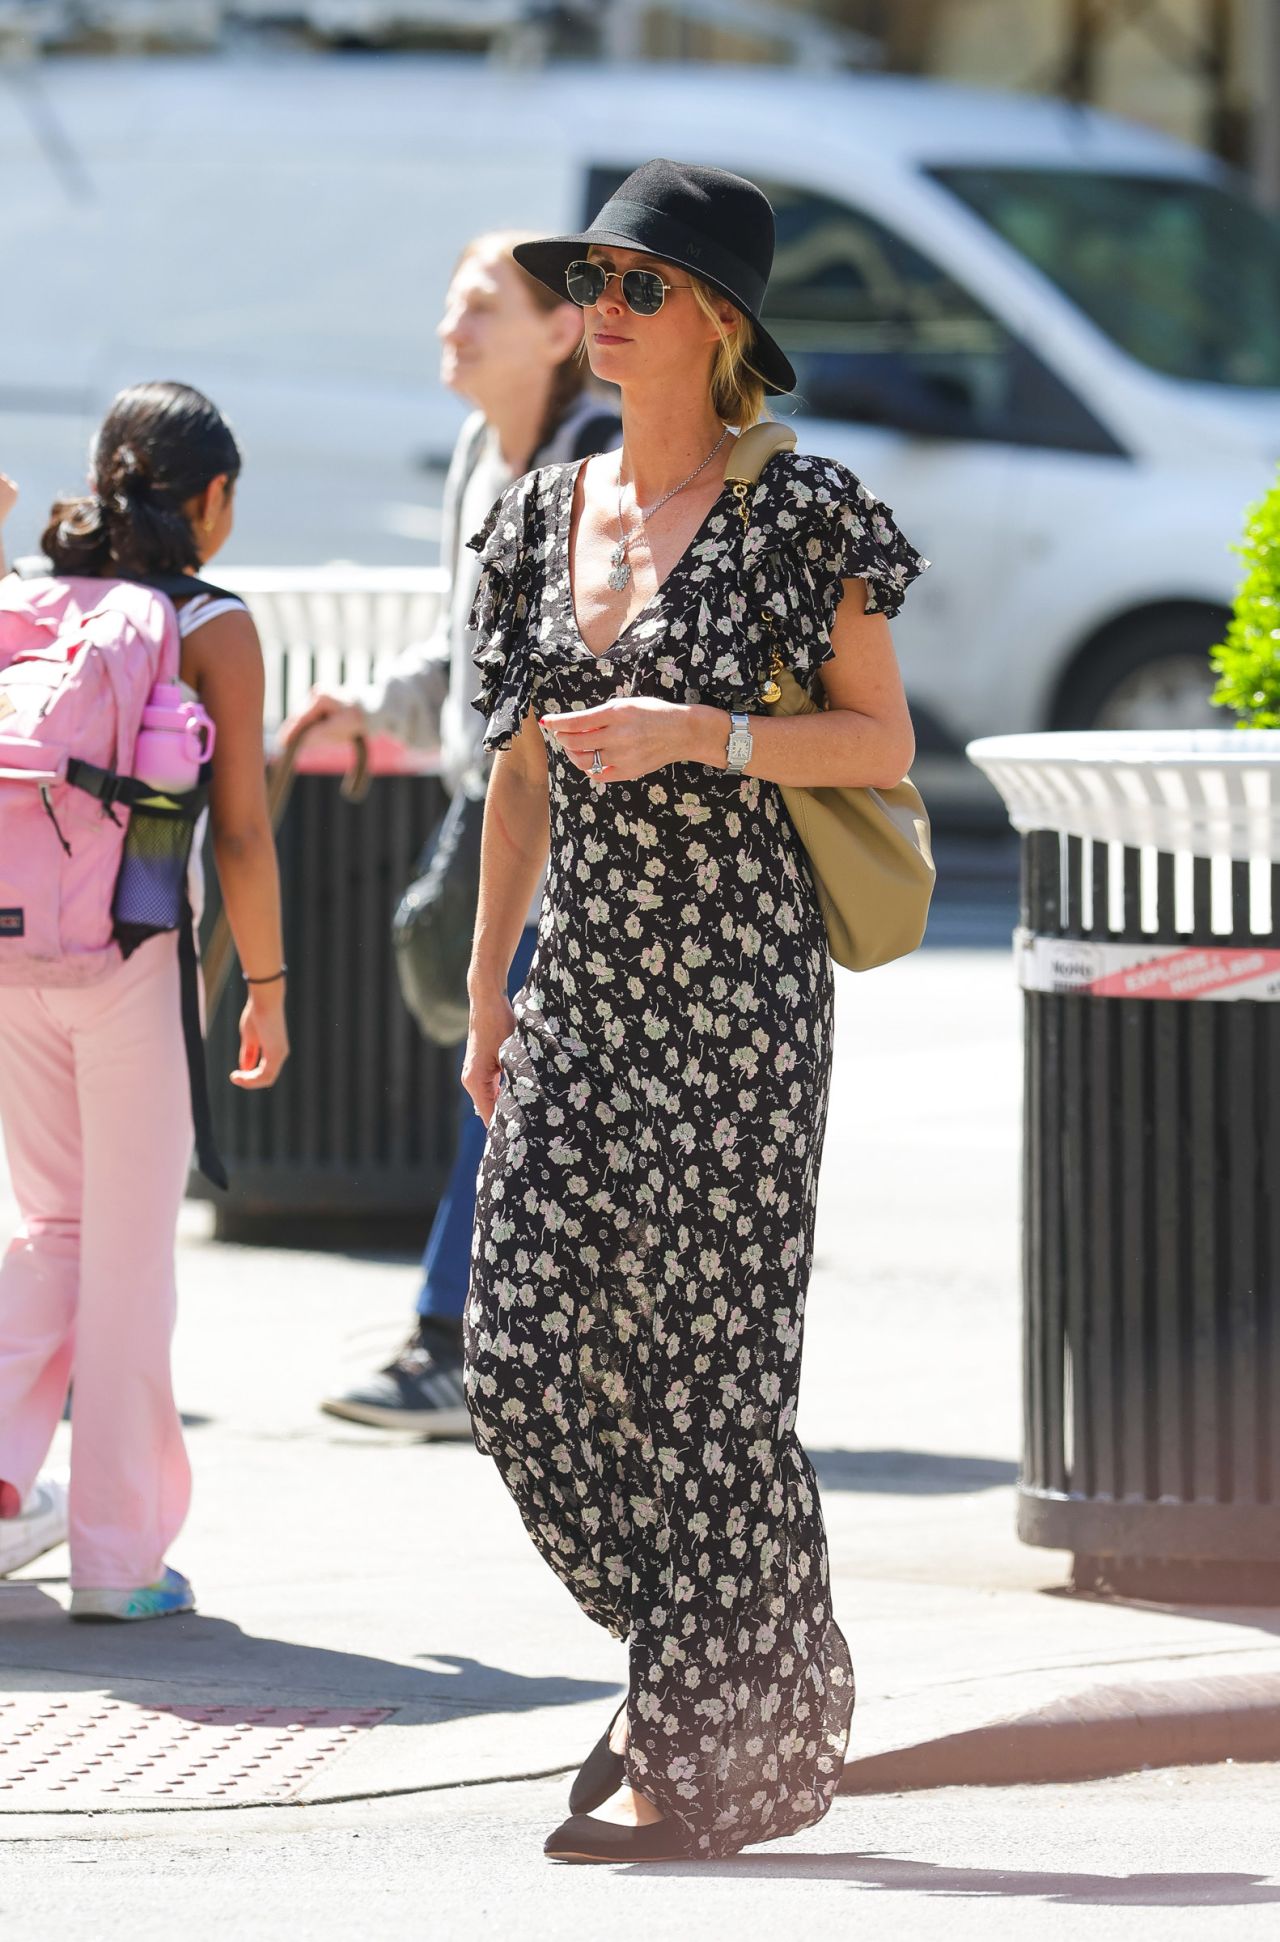 NICKY HILTON WAS SPOTTED OUT ENJOYING A WALK IN THE BIG APPLE7